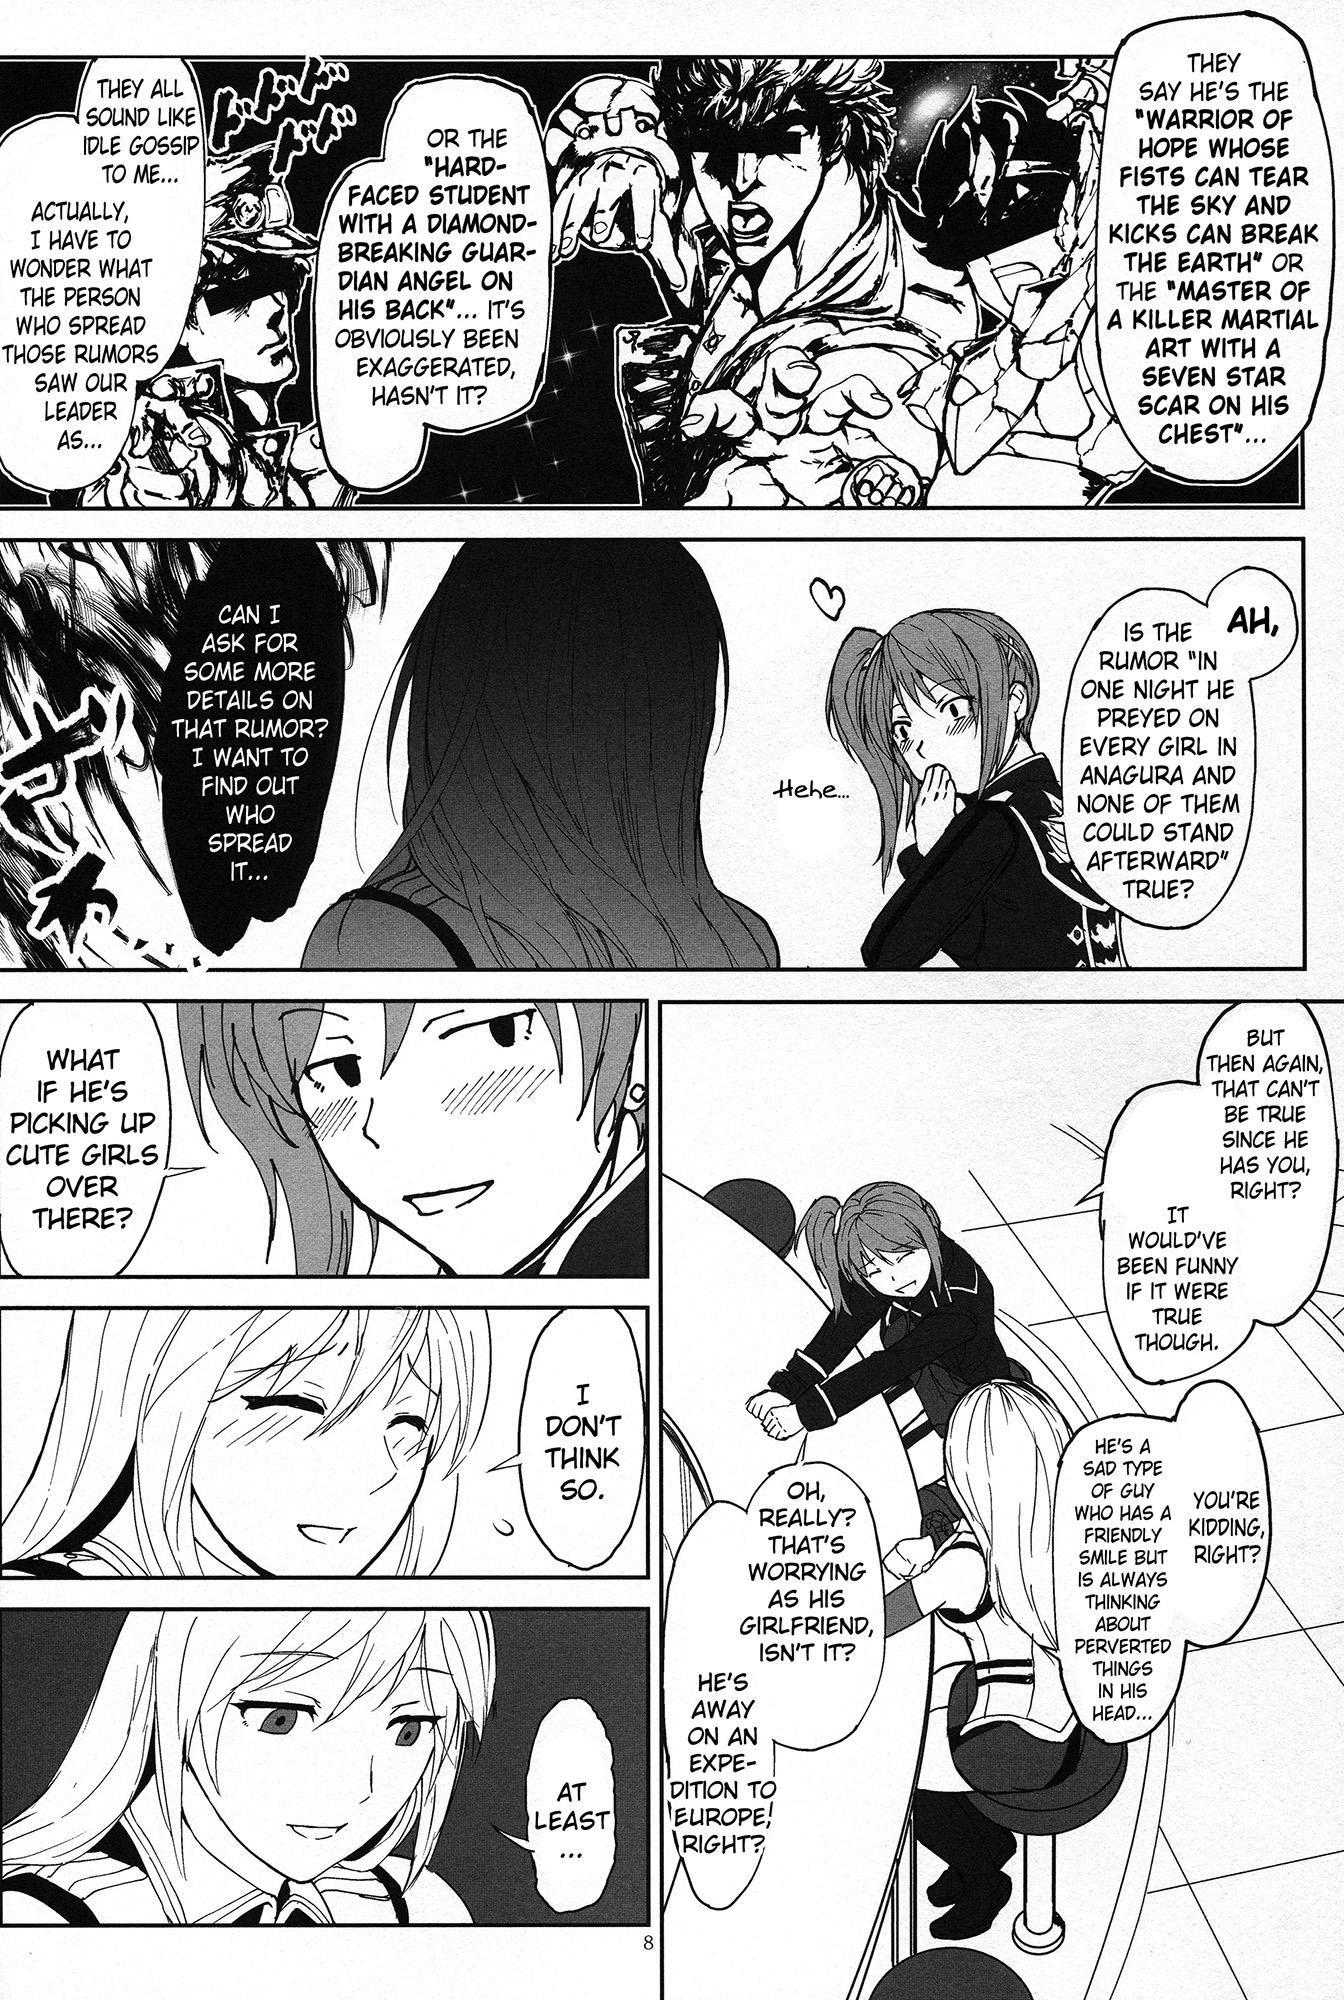 Rough Fuck Again #2 "Flashback Memories" - God eater Banho - Page 7